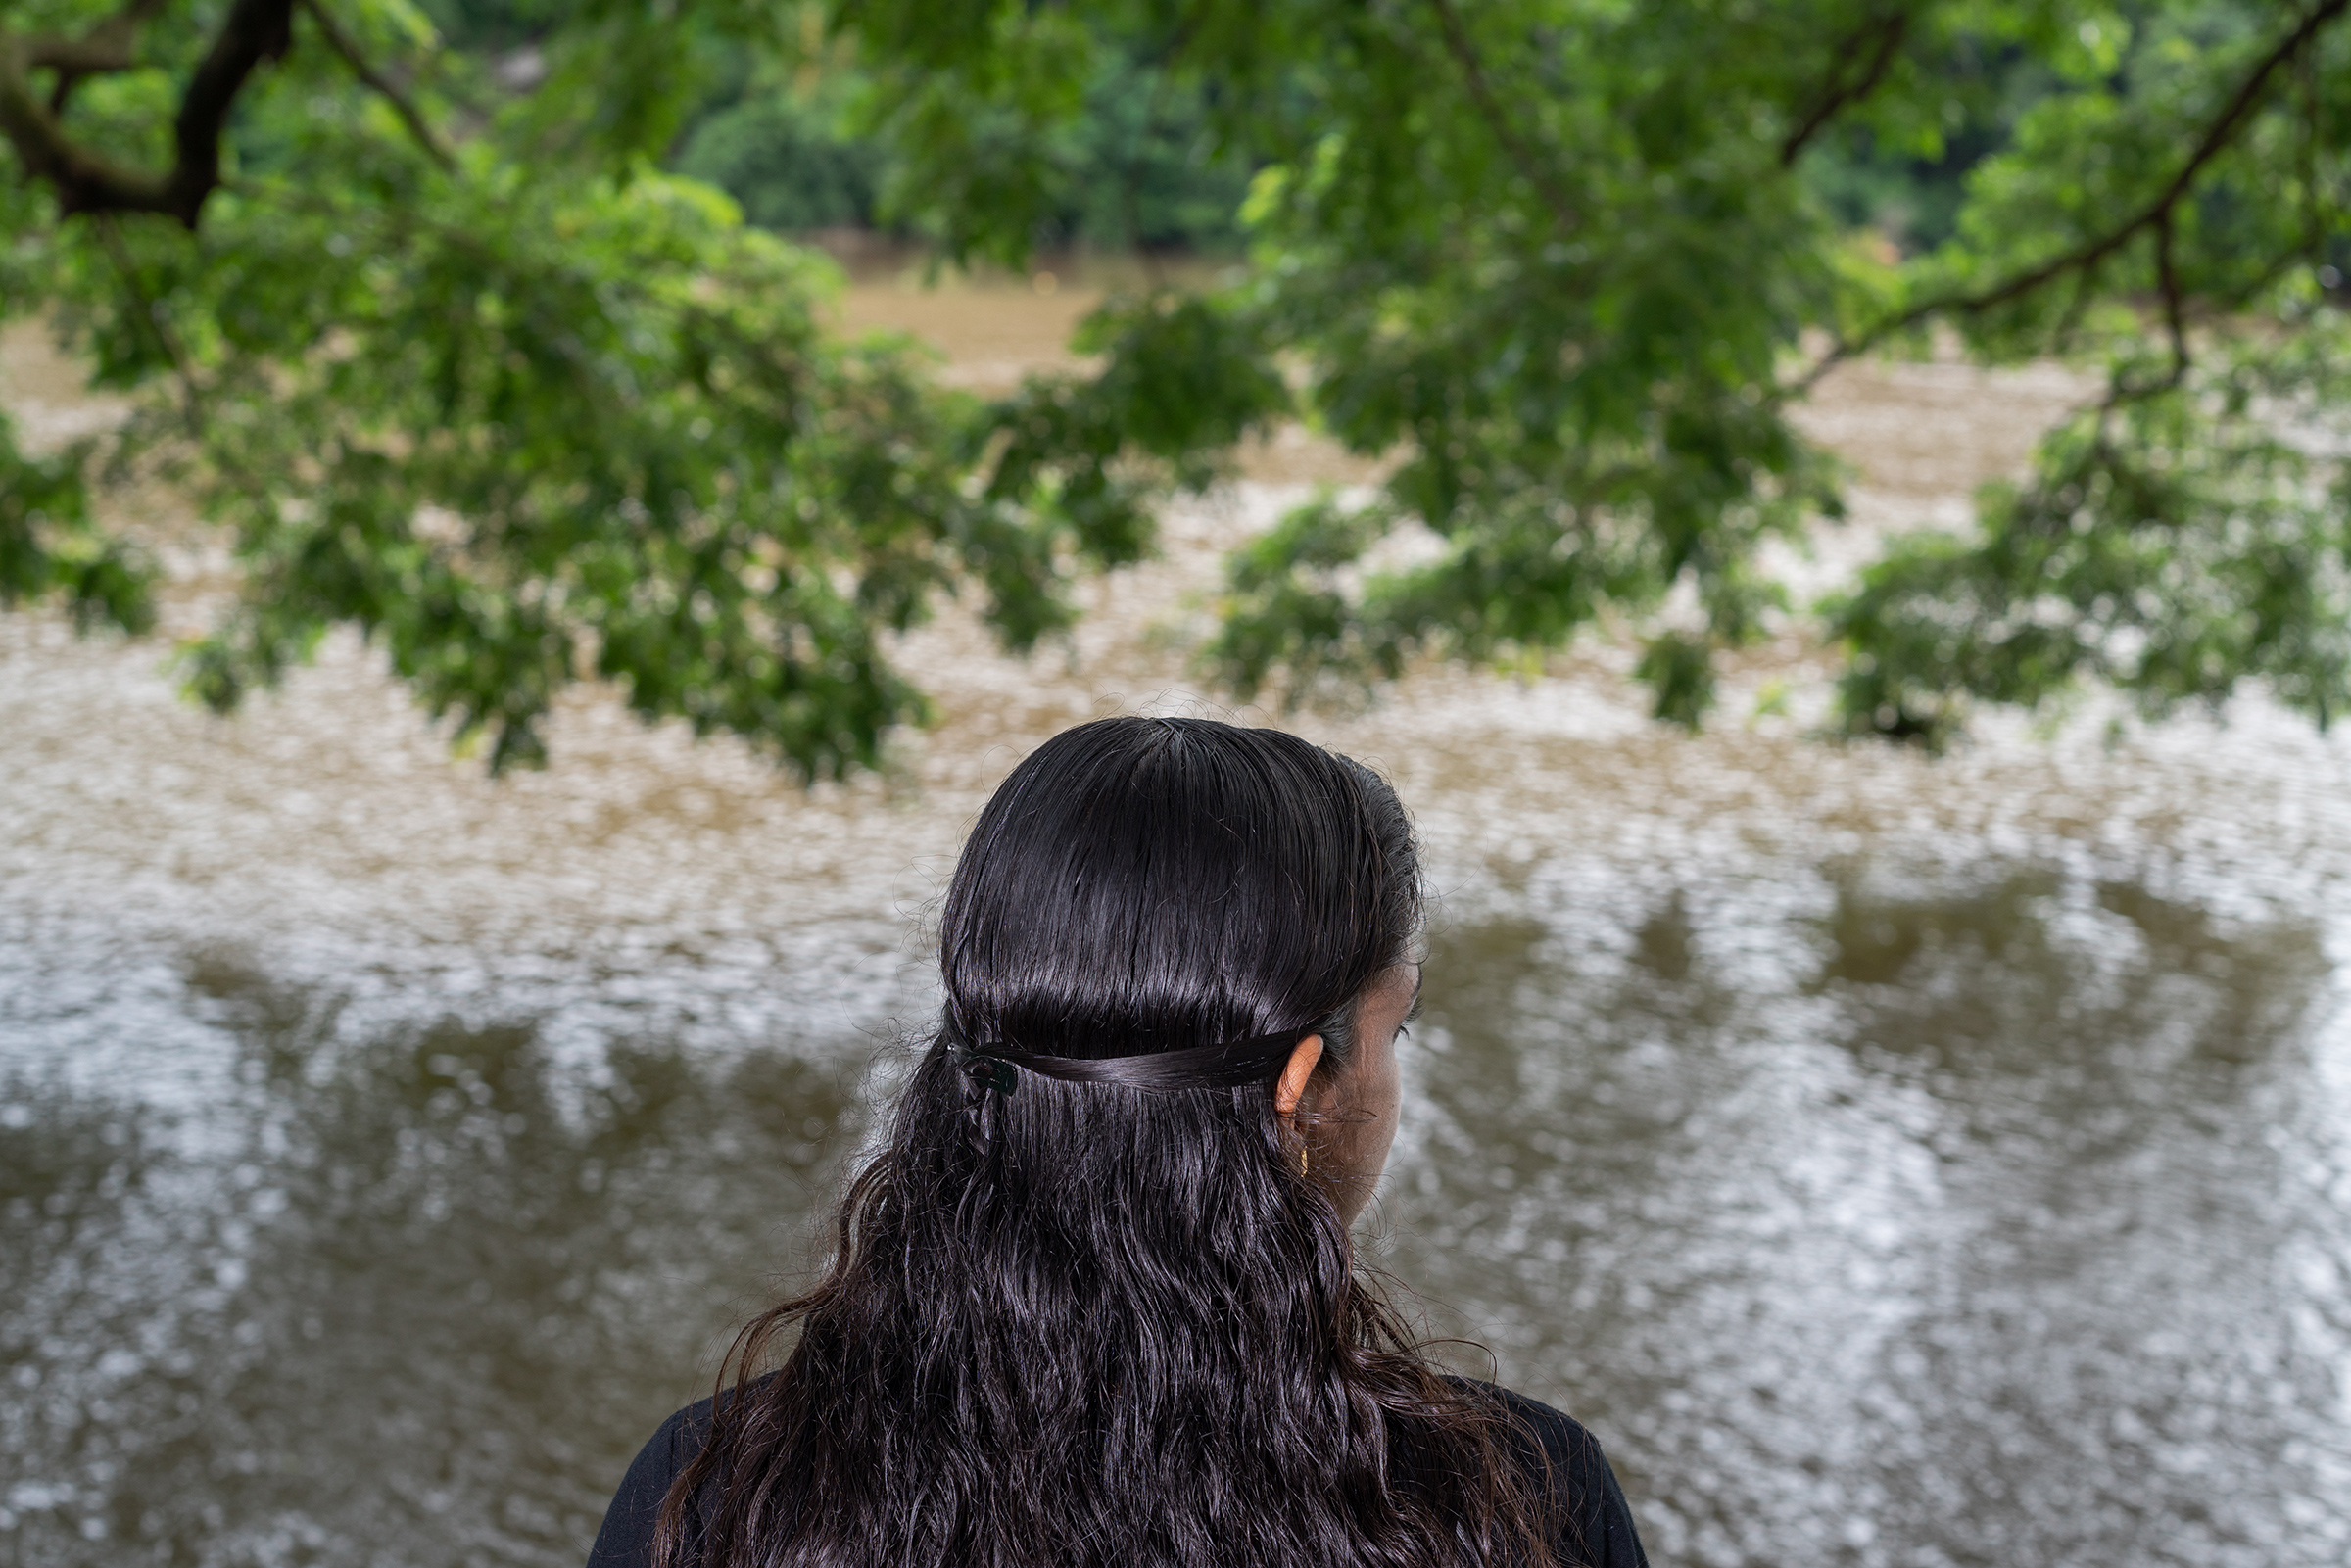 Meenakshi Sajeesh was forced to visit dubious clinics that claim to cure homosexuality after she told her parents she was a lesbian. Sajeesh is pictured overlooking the Periyar River in Aluva town, Kochi, on June 18 (Sameer Raichur for TIME)